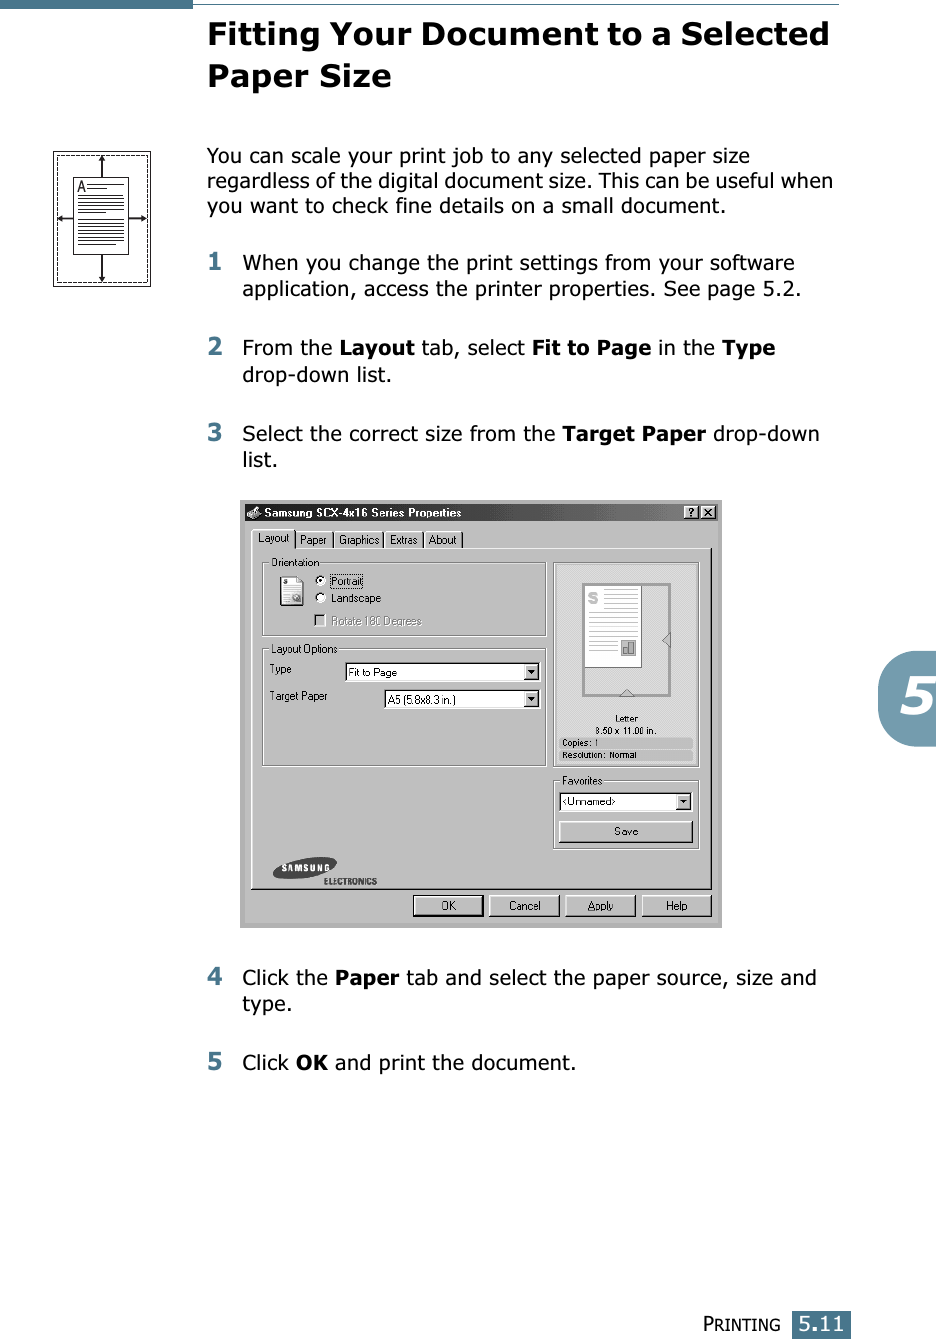 PRINTING5.115Fitting Your Document to a Selected Paper SizeYou can scale your print job to any selected paper size regardless of the digital document size. This can be useful when you want to check fine details on a small document. 1When you change the print settings from your software application, access the printer properties. See page 5.2.2From the Layout tab, select Fit to Page in the Type drop-down list. 3Select the correct size from the Target Paper drop-down list.4Click the Paper tab and select the paper source, size and type.5Click OK and print the document. A